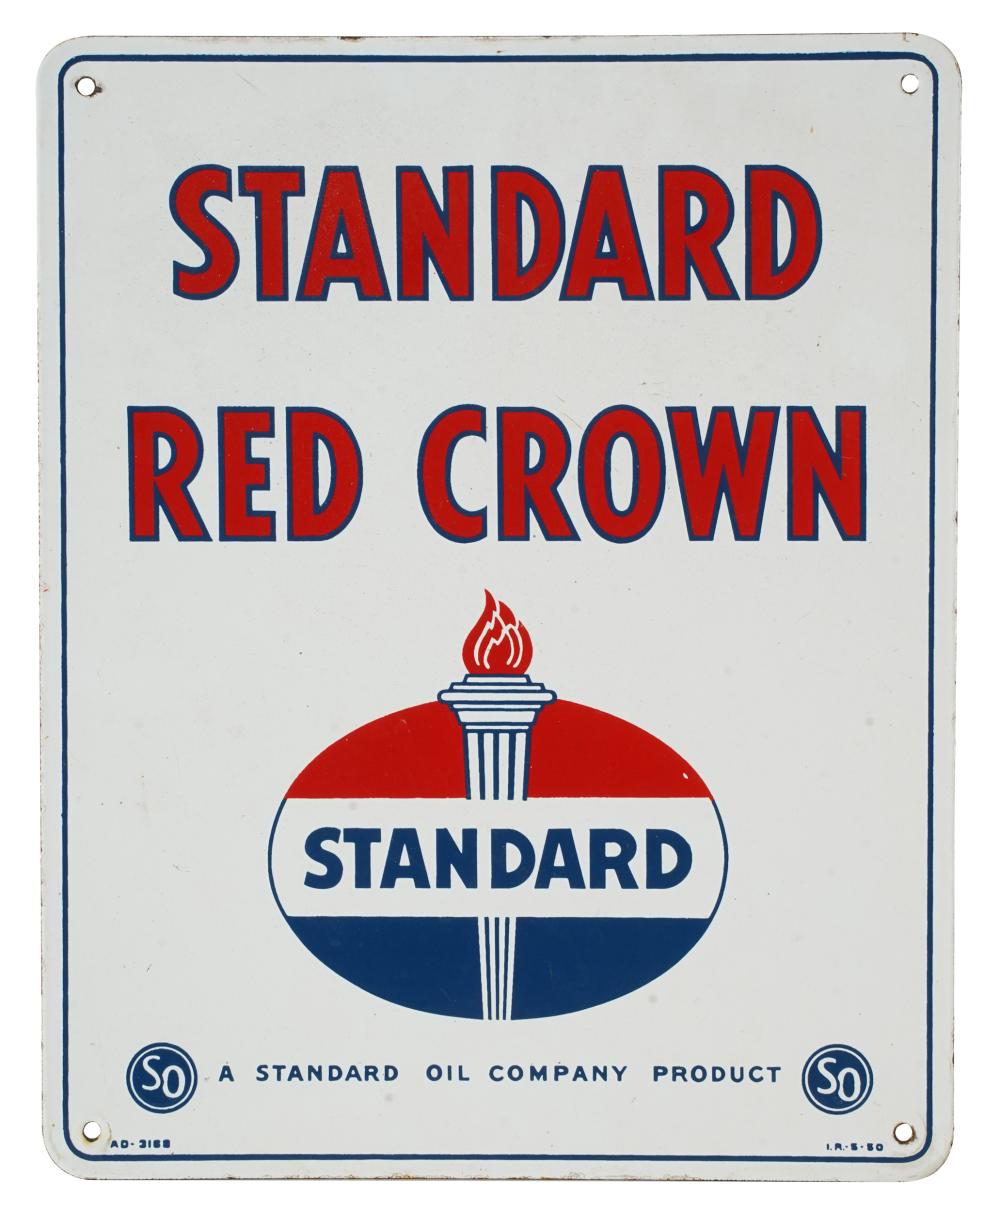 STANDARD RED CROWN OIL SIGNCondition: